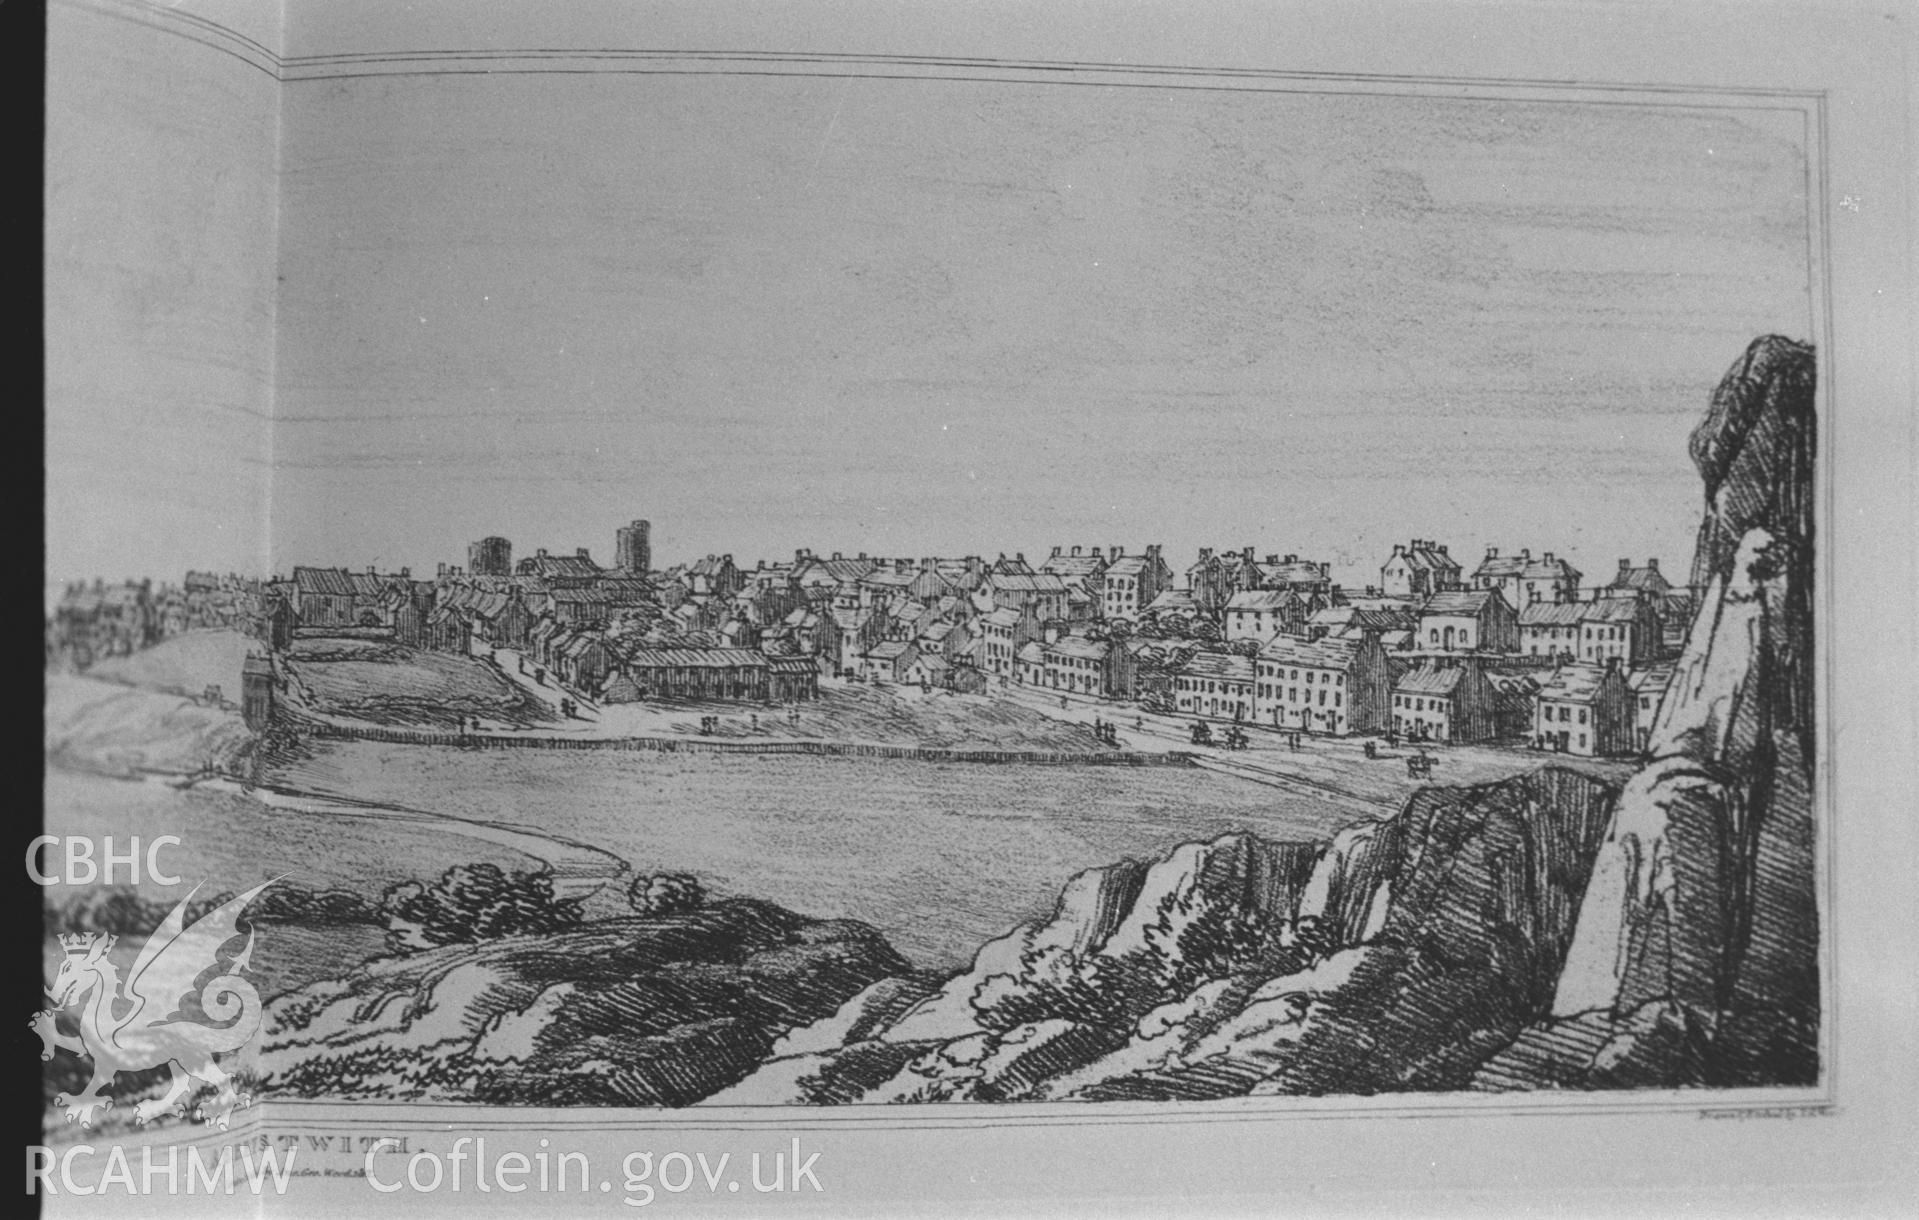 'Aberystwith' drawn and engraved by J. G. Woods, c.1810. Photographed by Arthur O. Chater in January 1968 for his own private research.